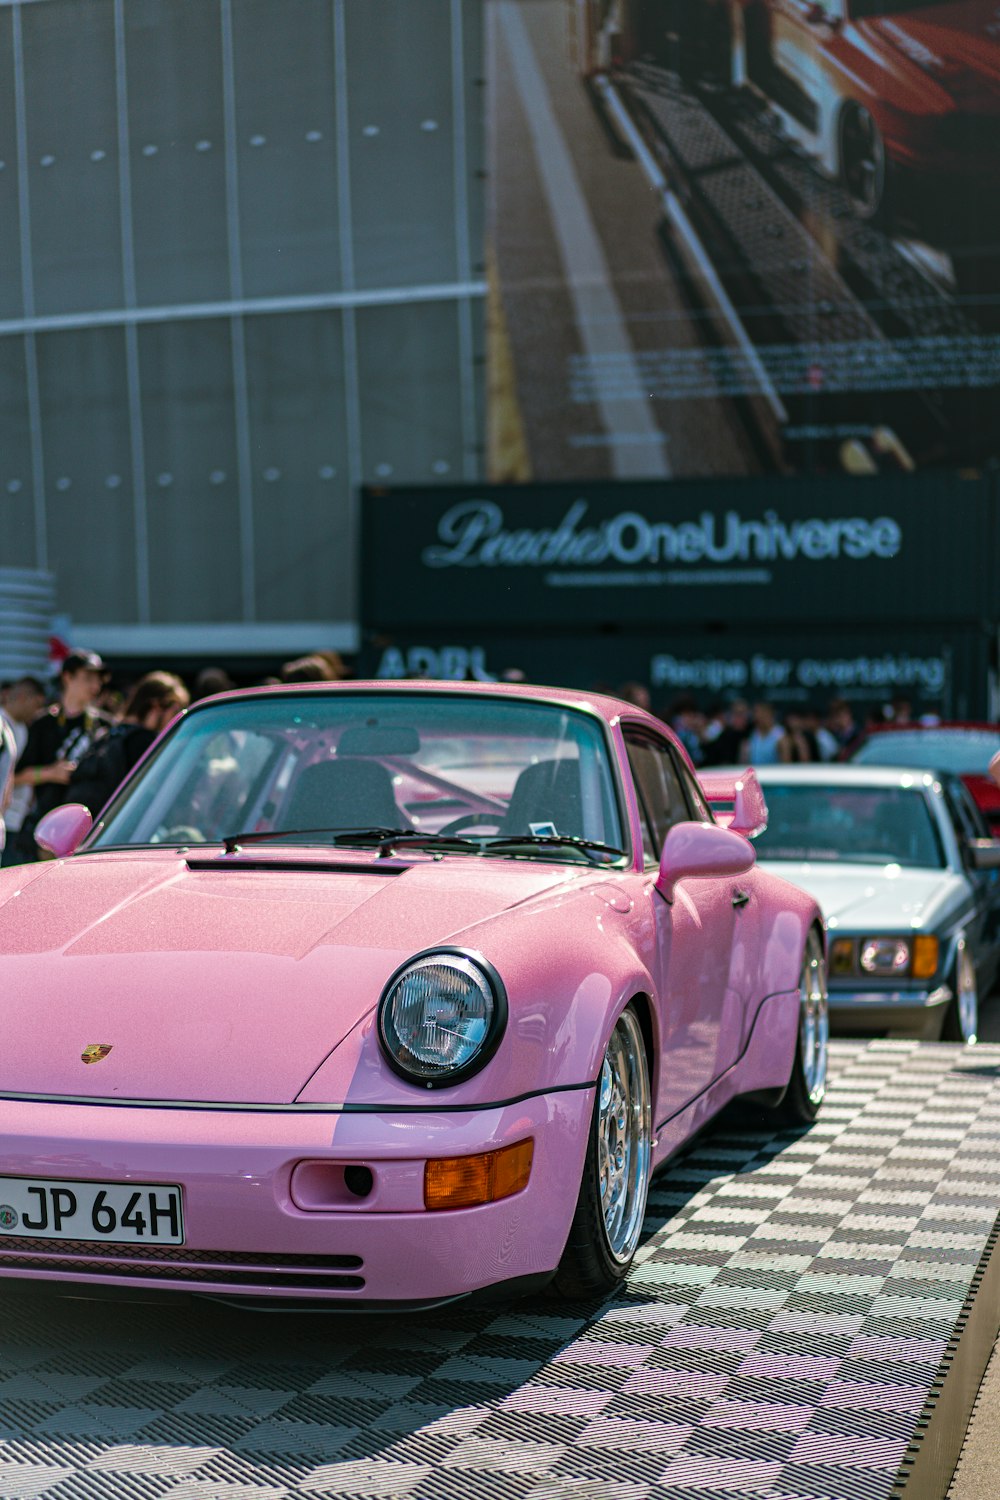 a pink porsche parked in front of a crowd of people